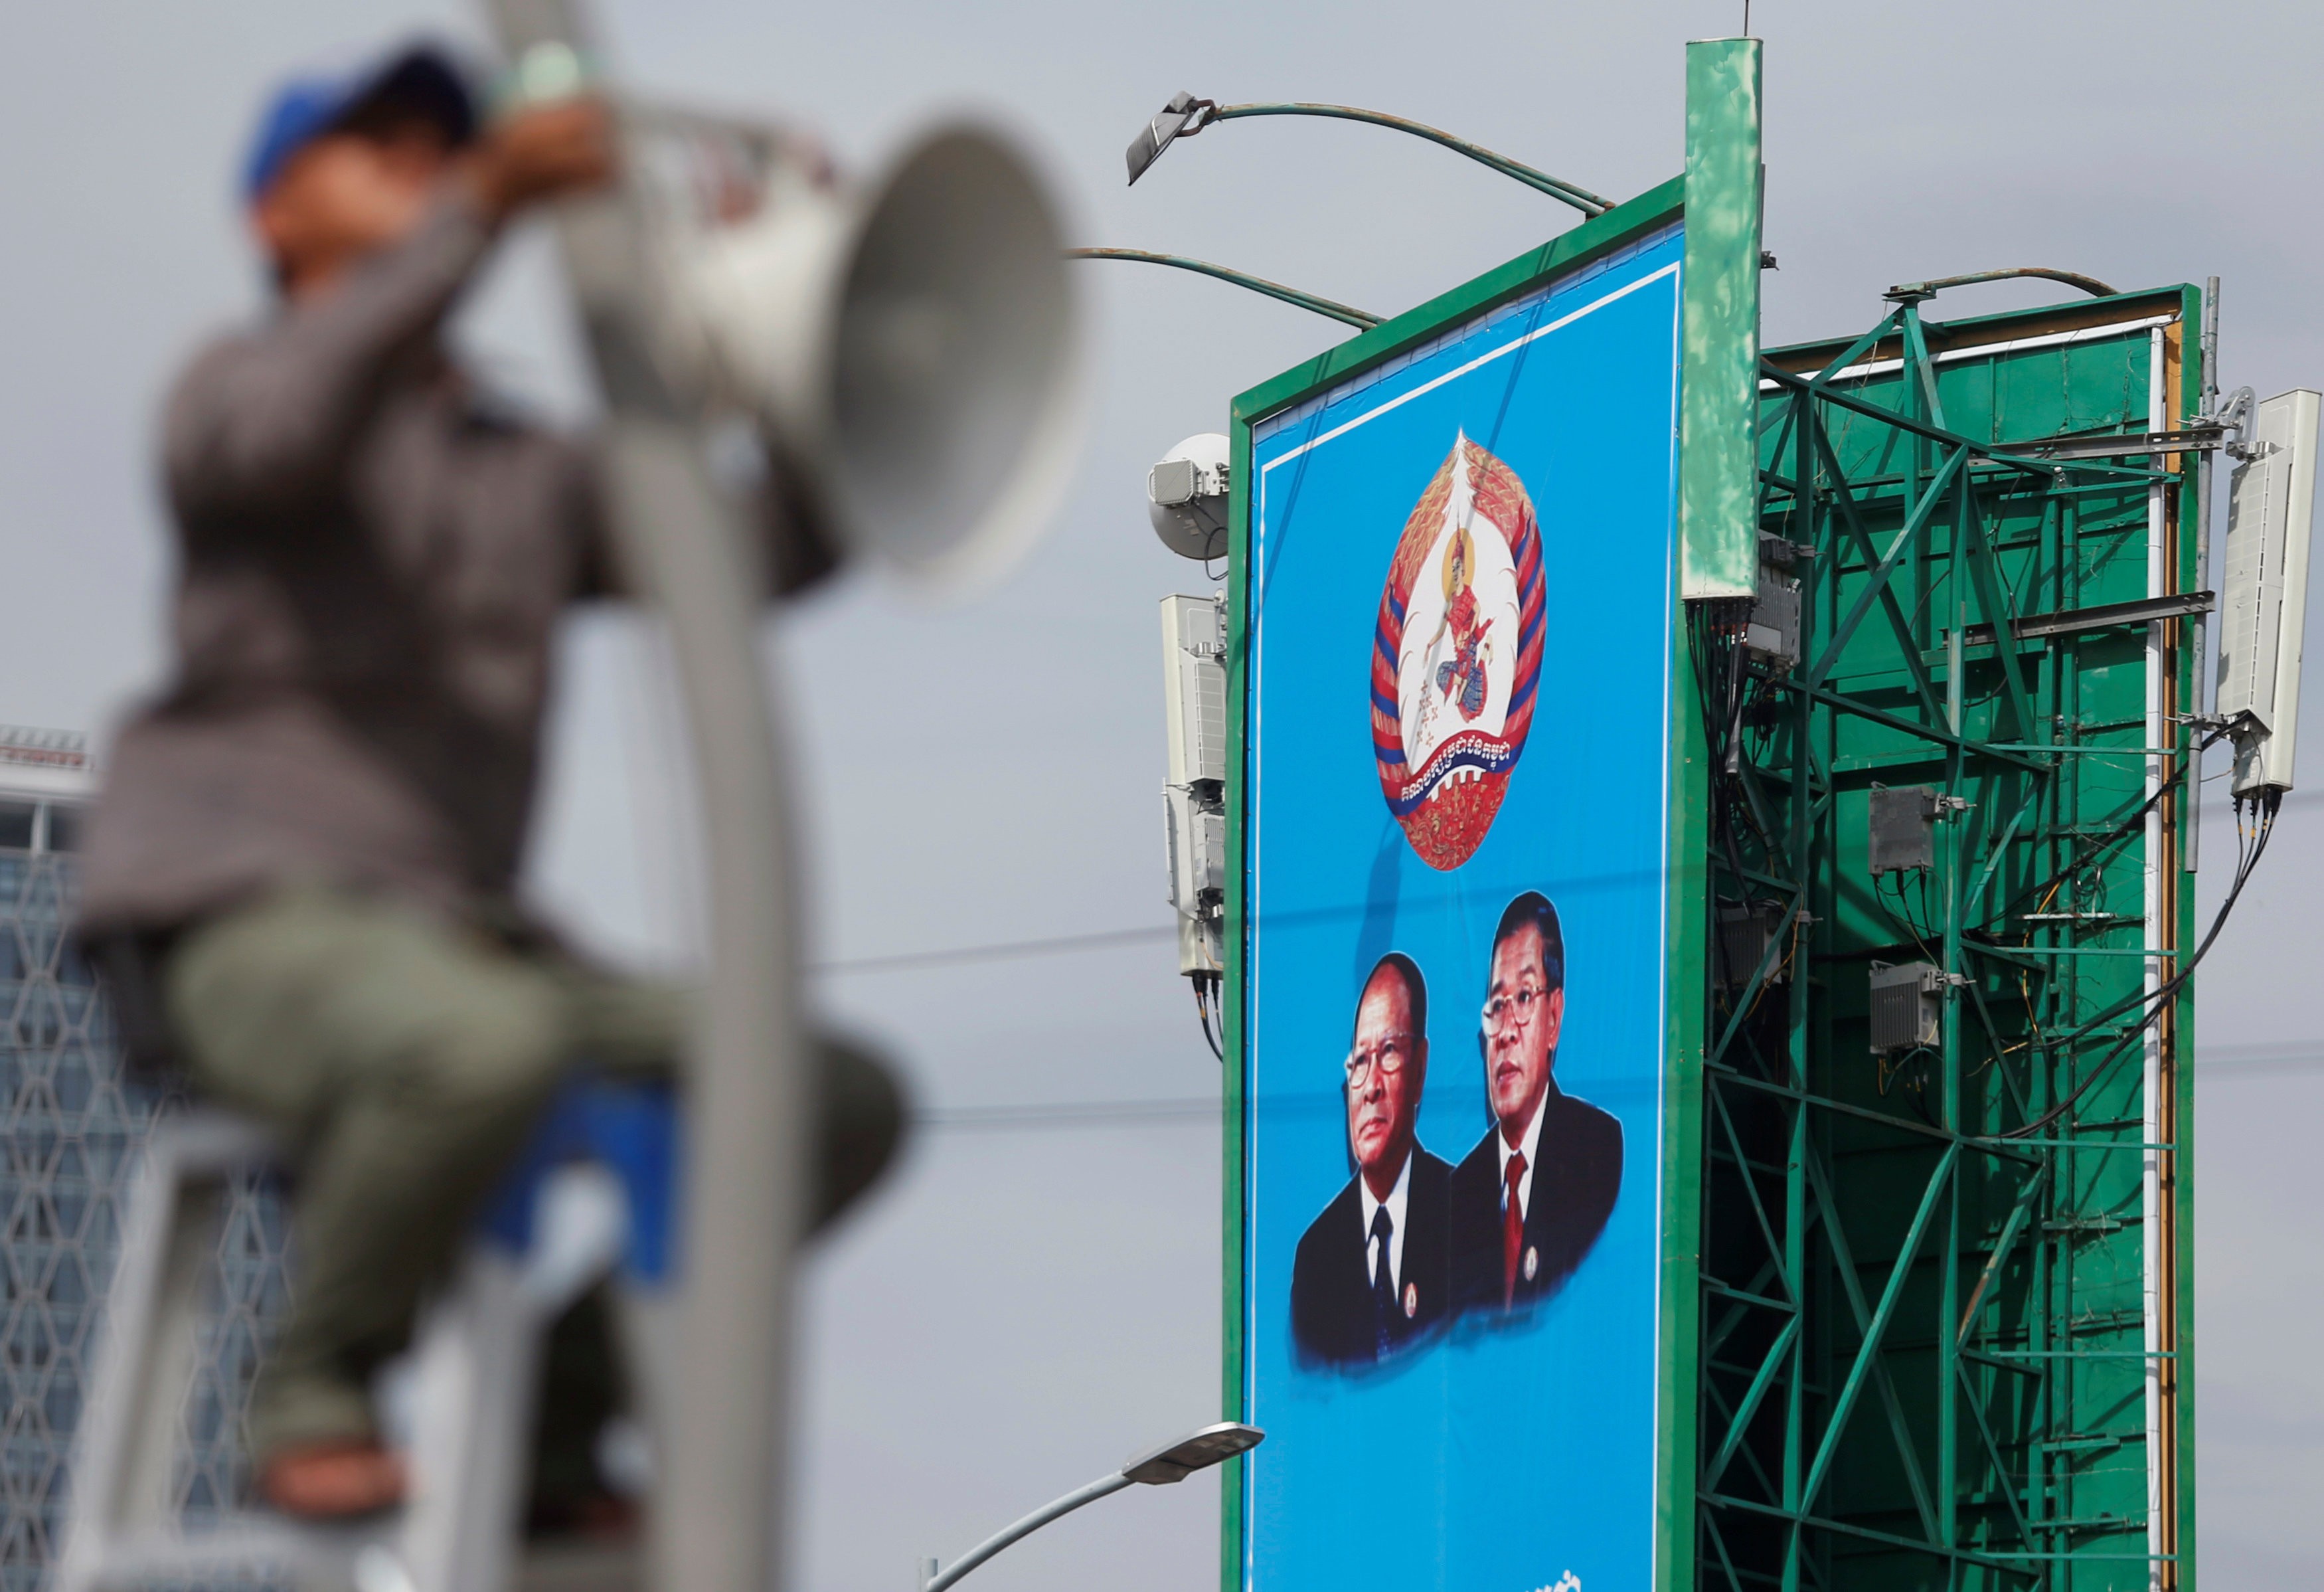 A poster of the Cambodian People's Party at a construction site in Phnom Penh. Photo: Reuters